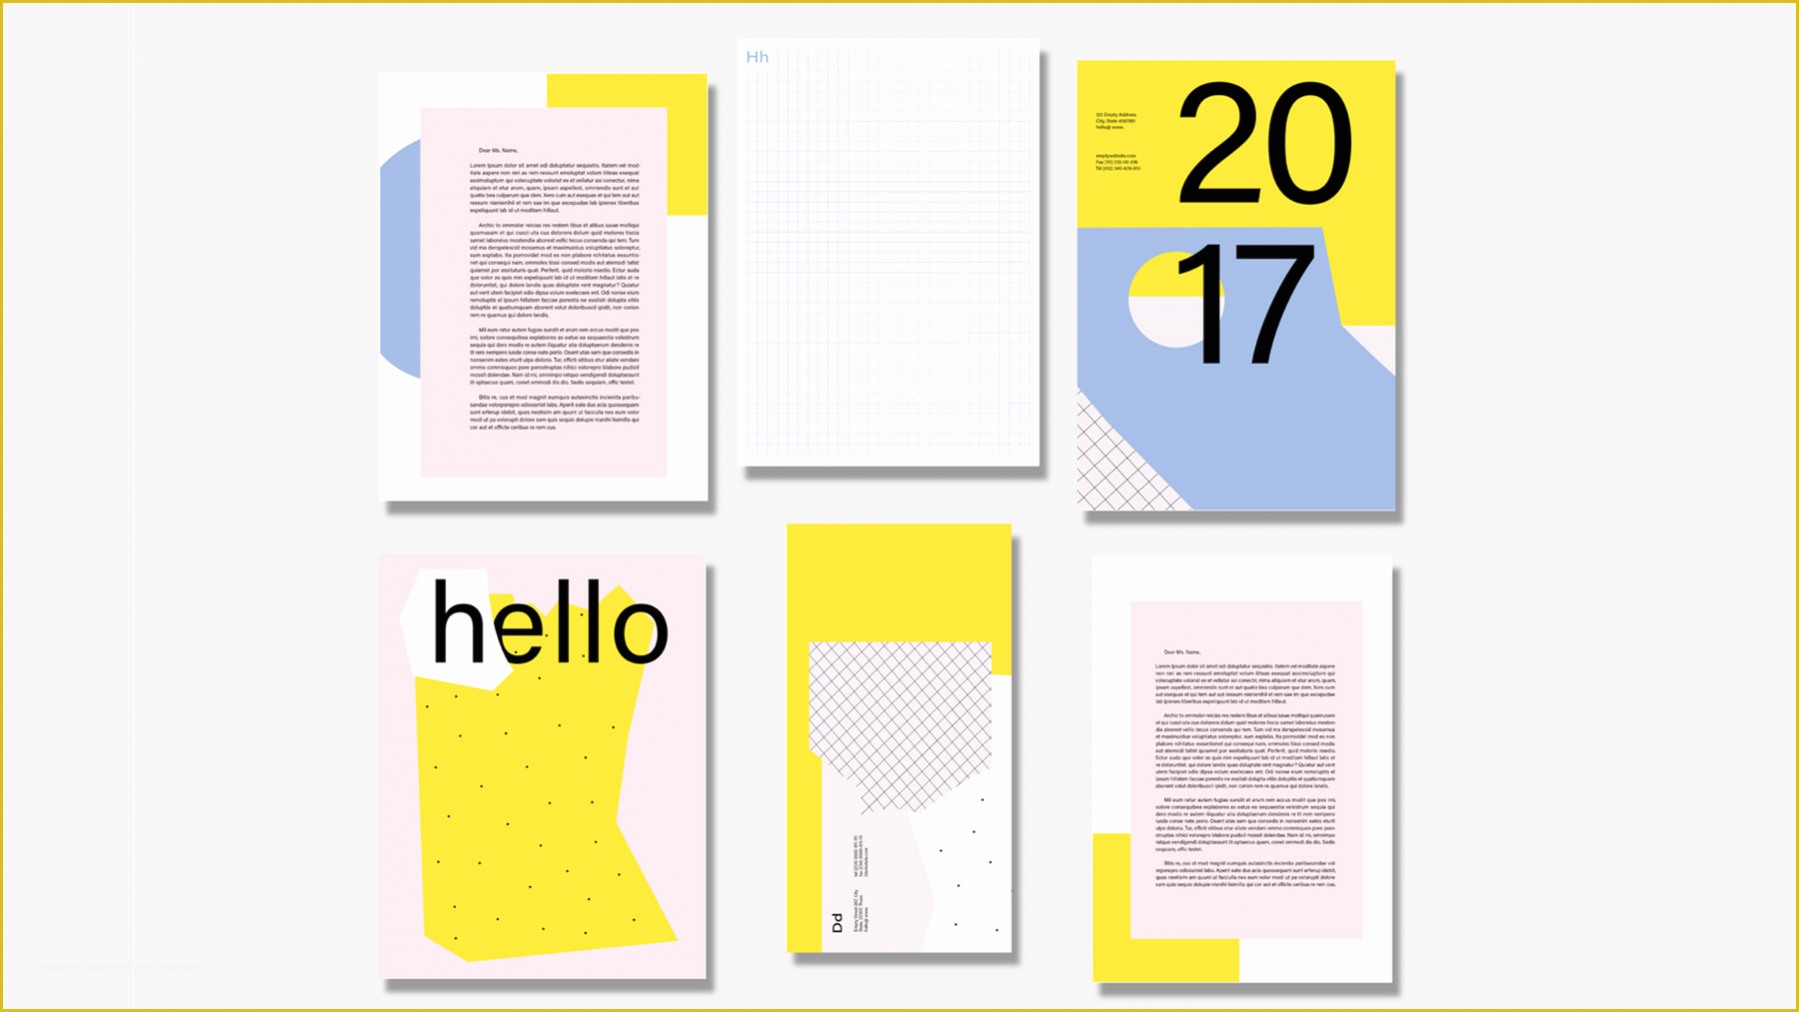 Adobe Stock Free Templates Of now Available Adobe Stock Templates for Indesign Cc